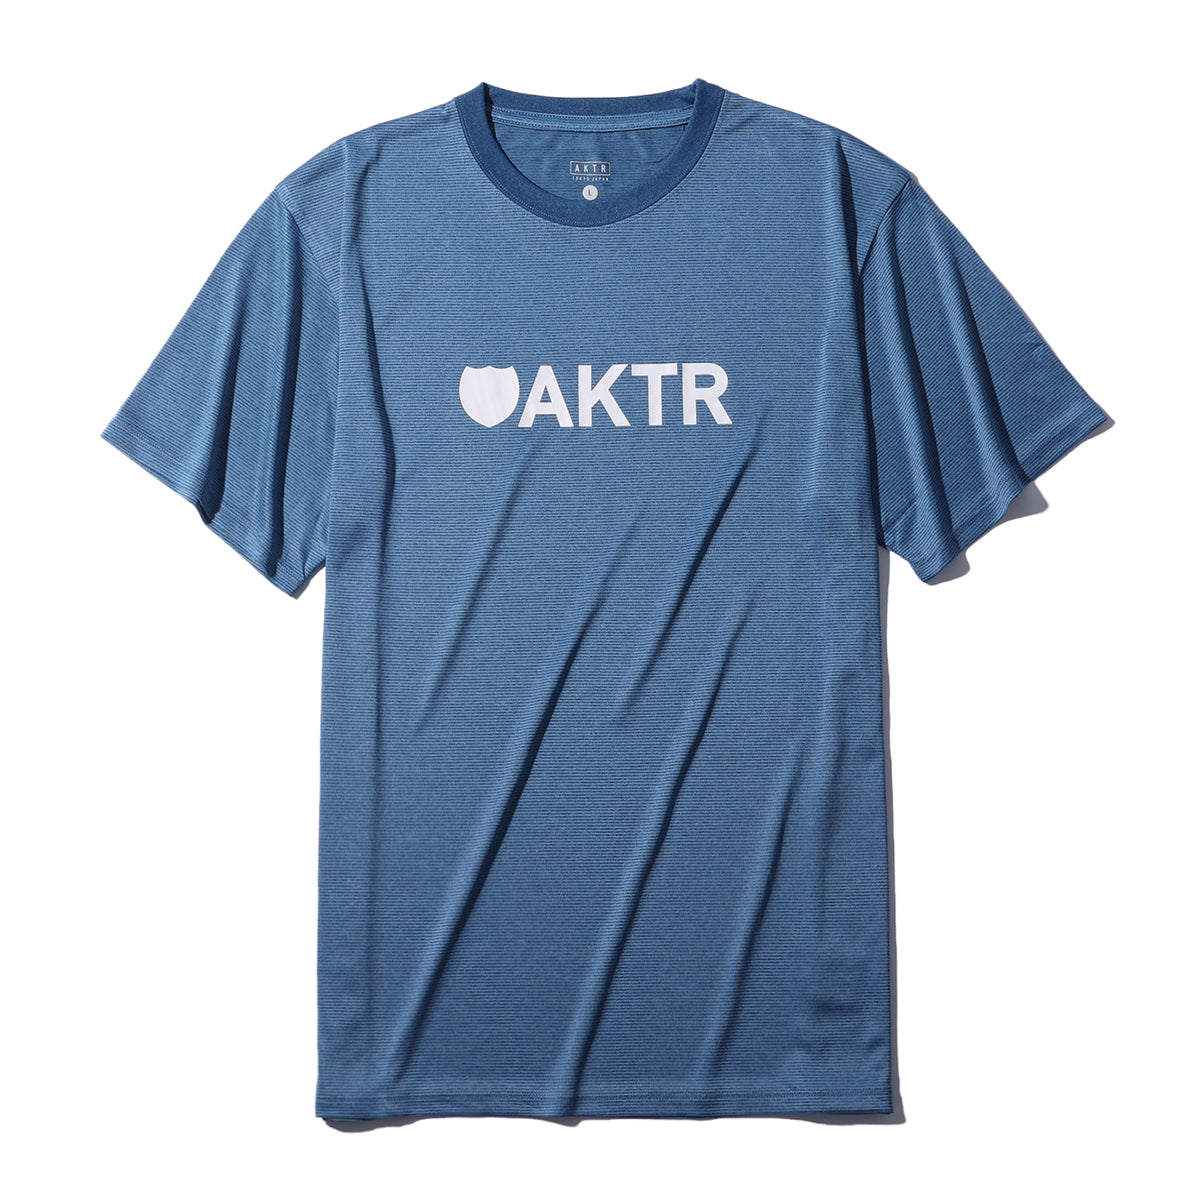 CLASSIC AKTR LOGO SPORTS TEE – Kinetics｜OFFICIAL ONLINE STORE